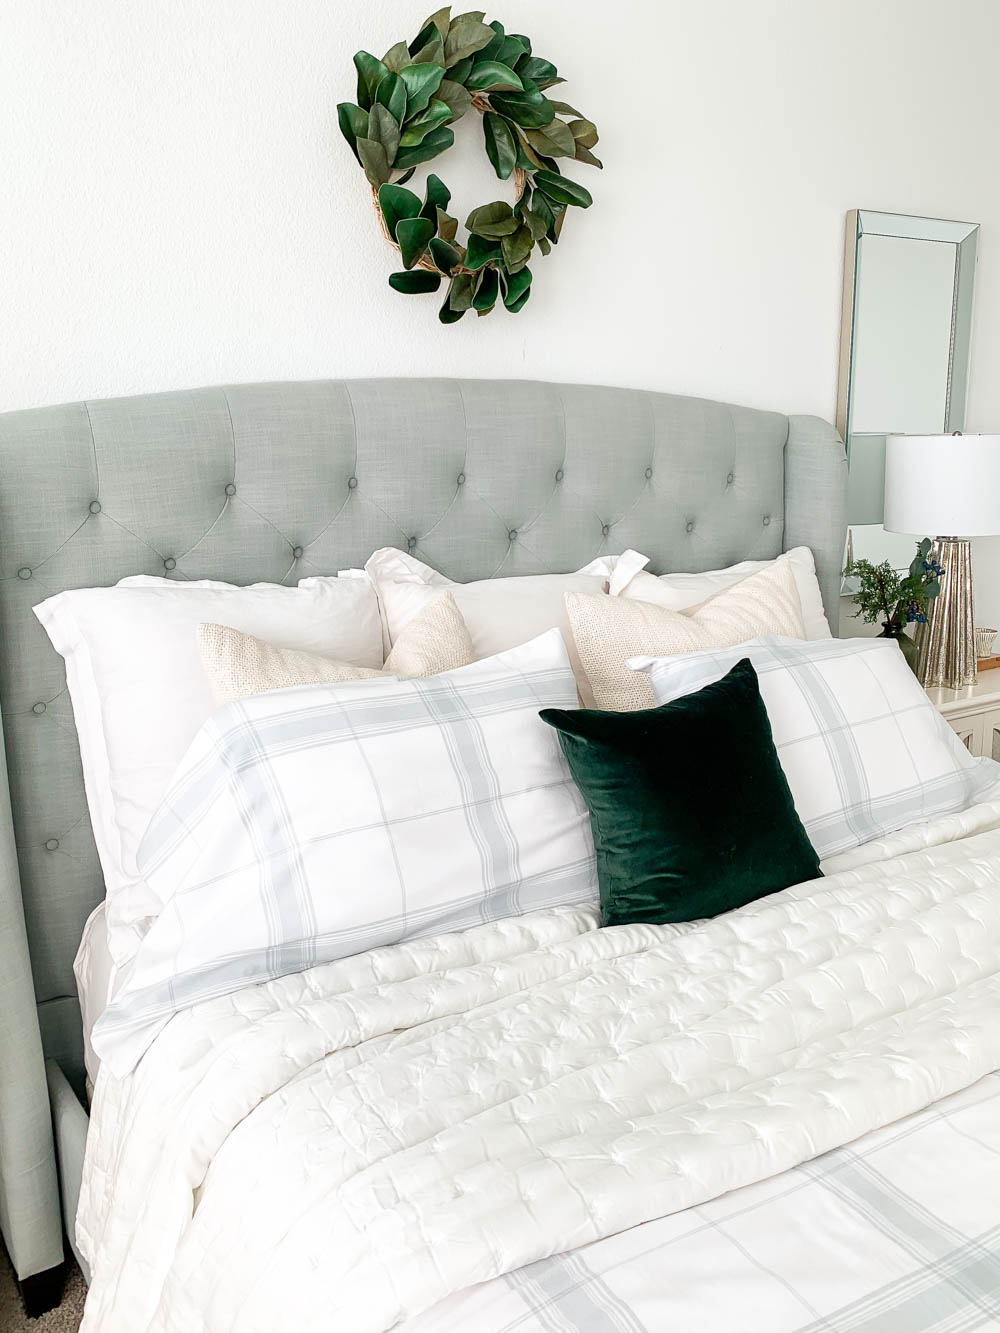 Add cozy bedding to make your bedroom full of holiday vibes for the season. #ABlissfulNest #bedroomdecor #christmas